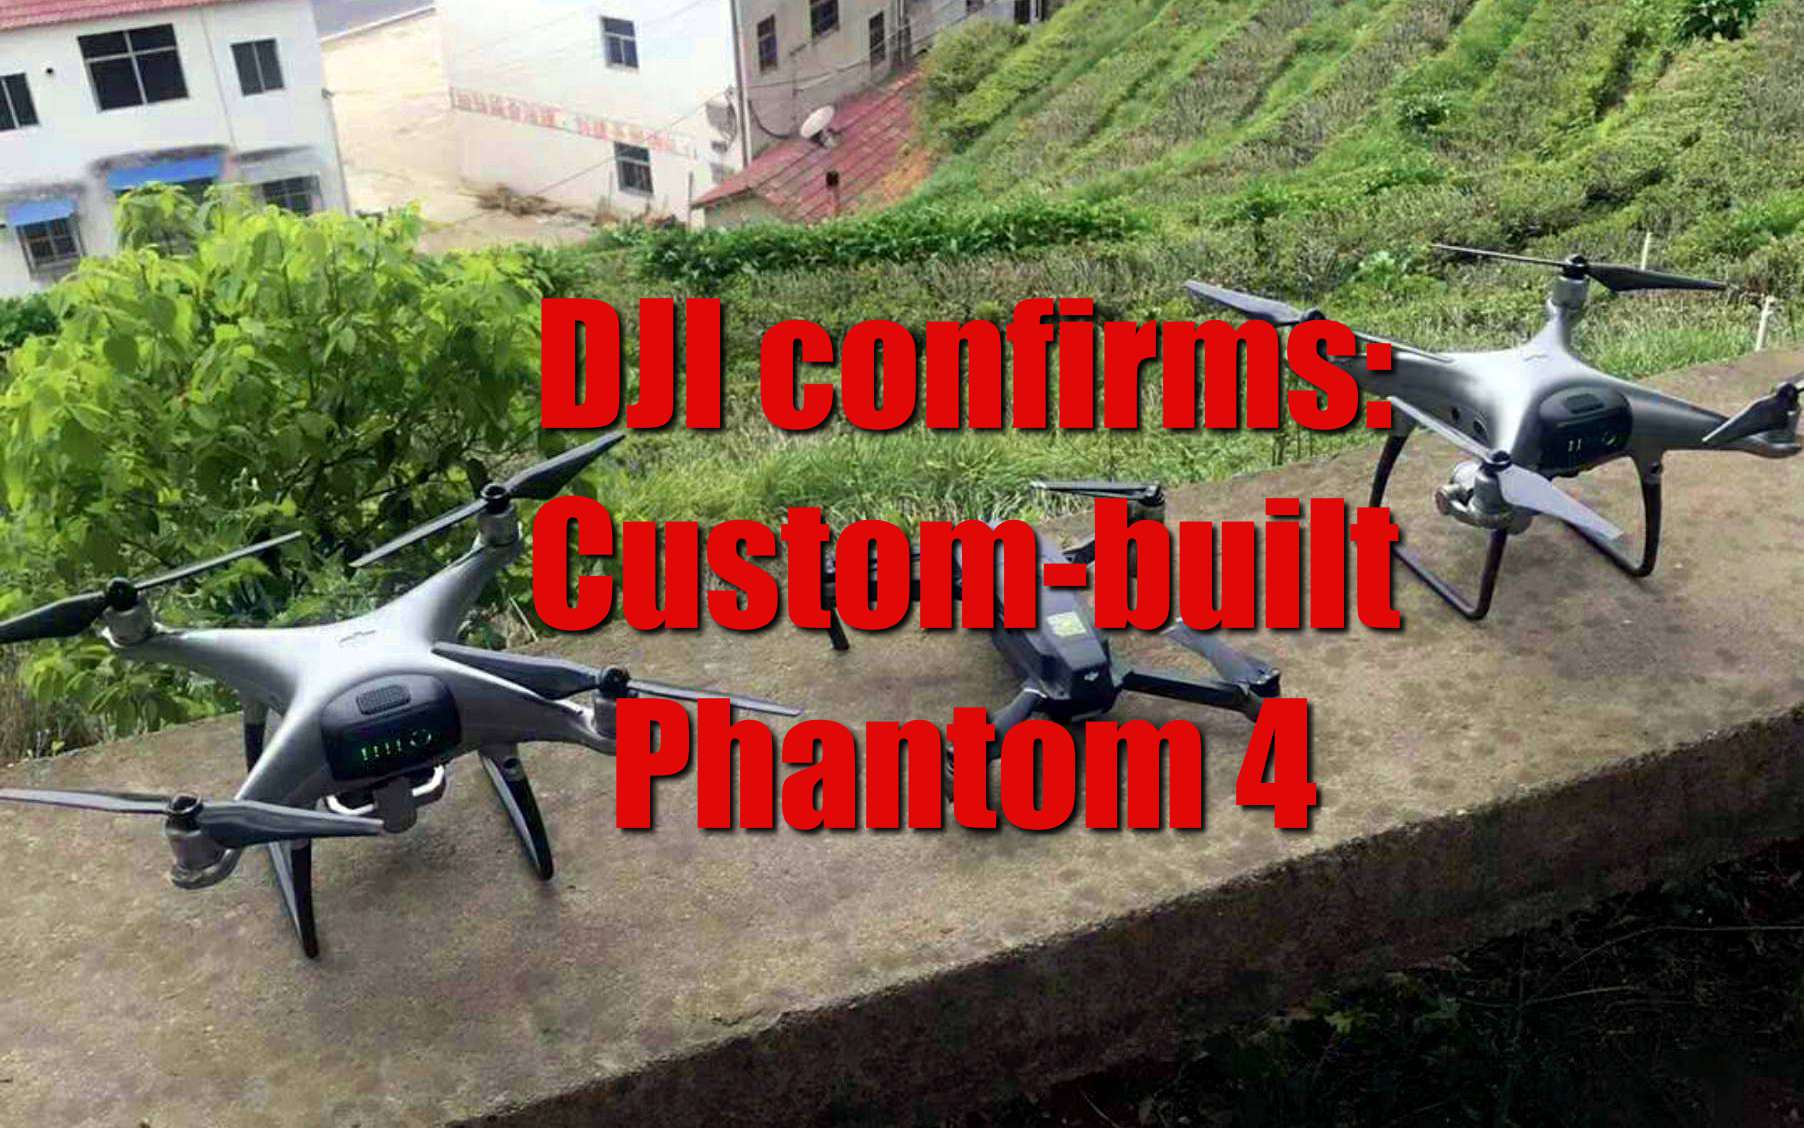 Fremskynde Sammenligne Anonym DJI confirms: these photos do NOT show a new Phantom 5 drone with an  interchangeable lens system